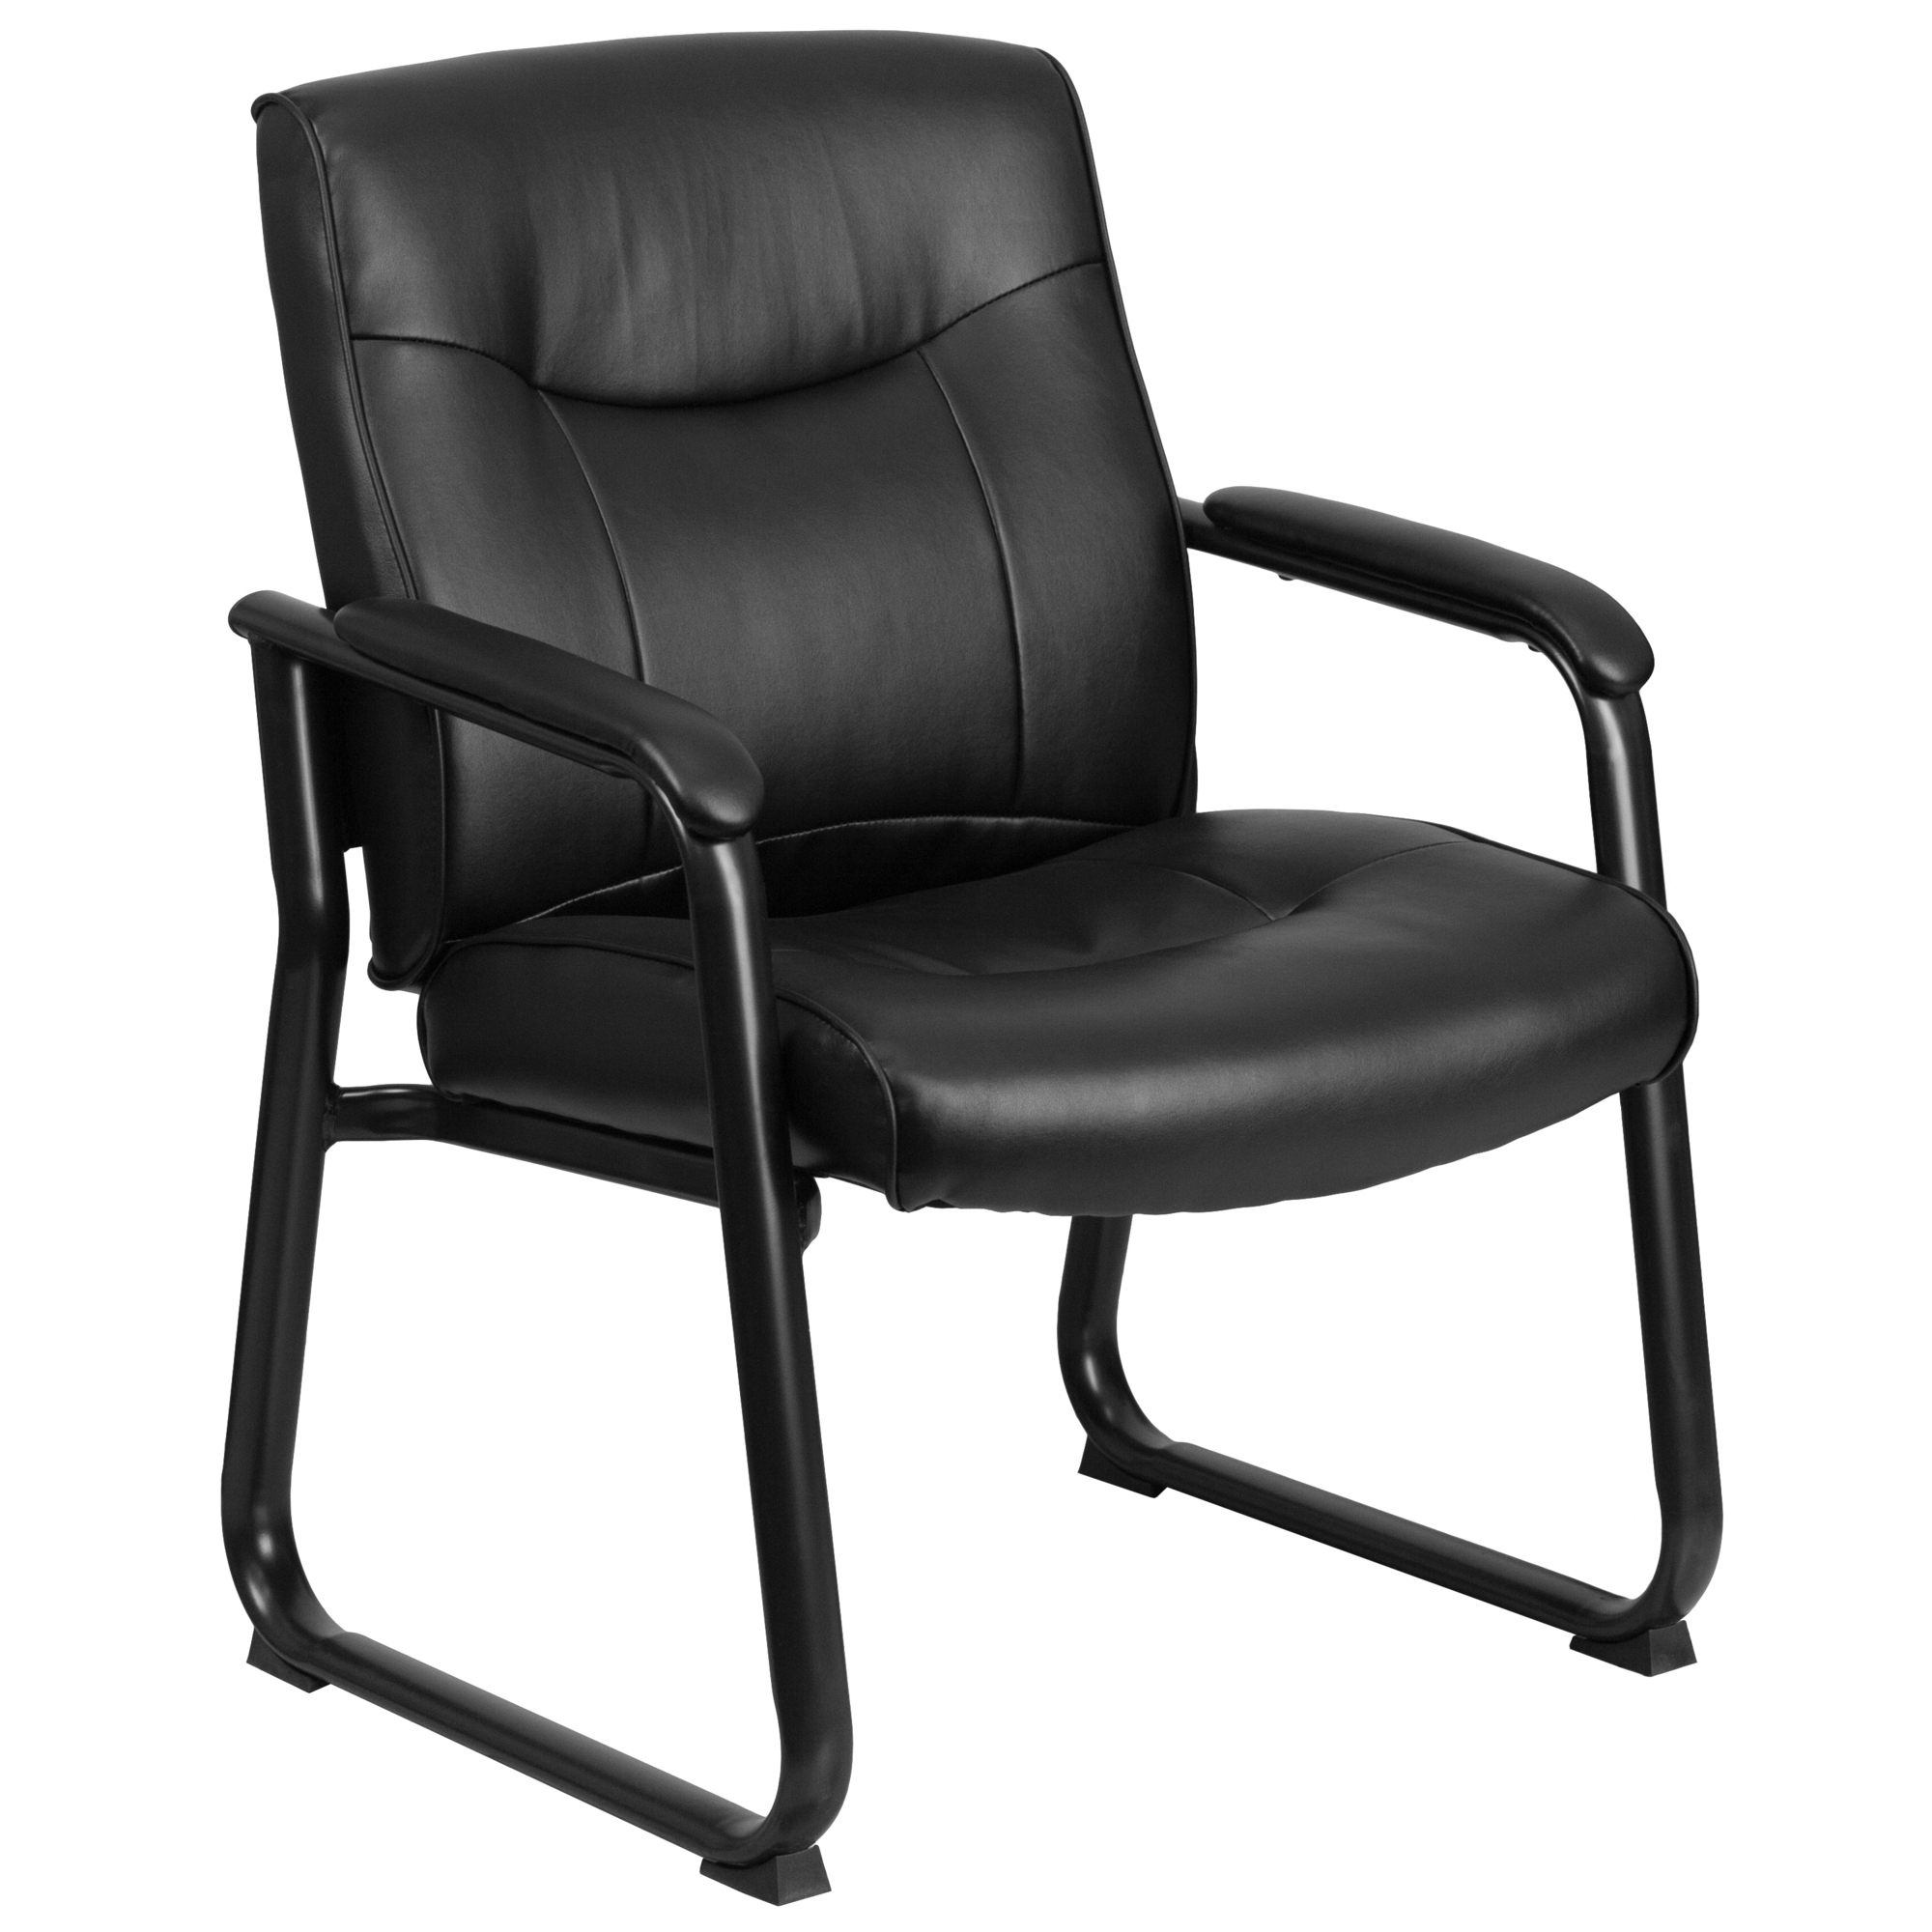 Flash Furniture, Big Tall 500 lb. Rated Black LeatherSoft Chair, Primary Color Black, Included (qty.) 1, Model GO2136